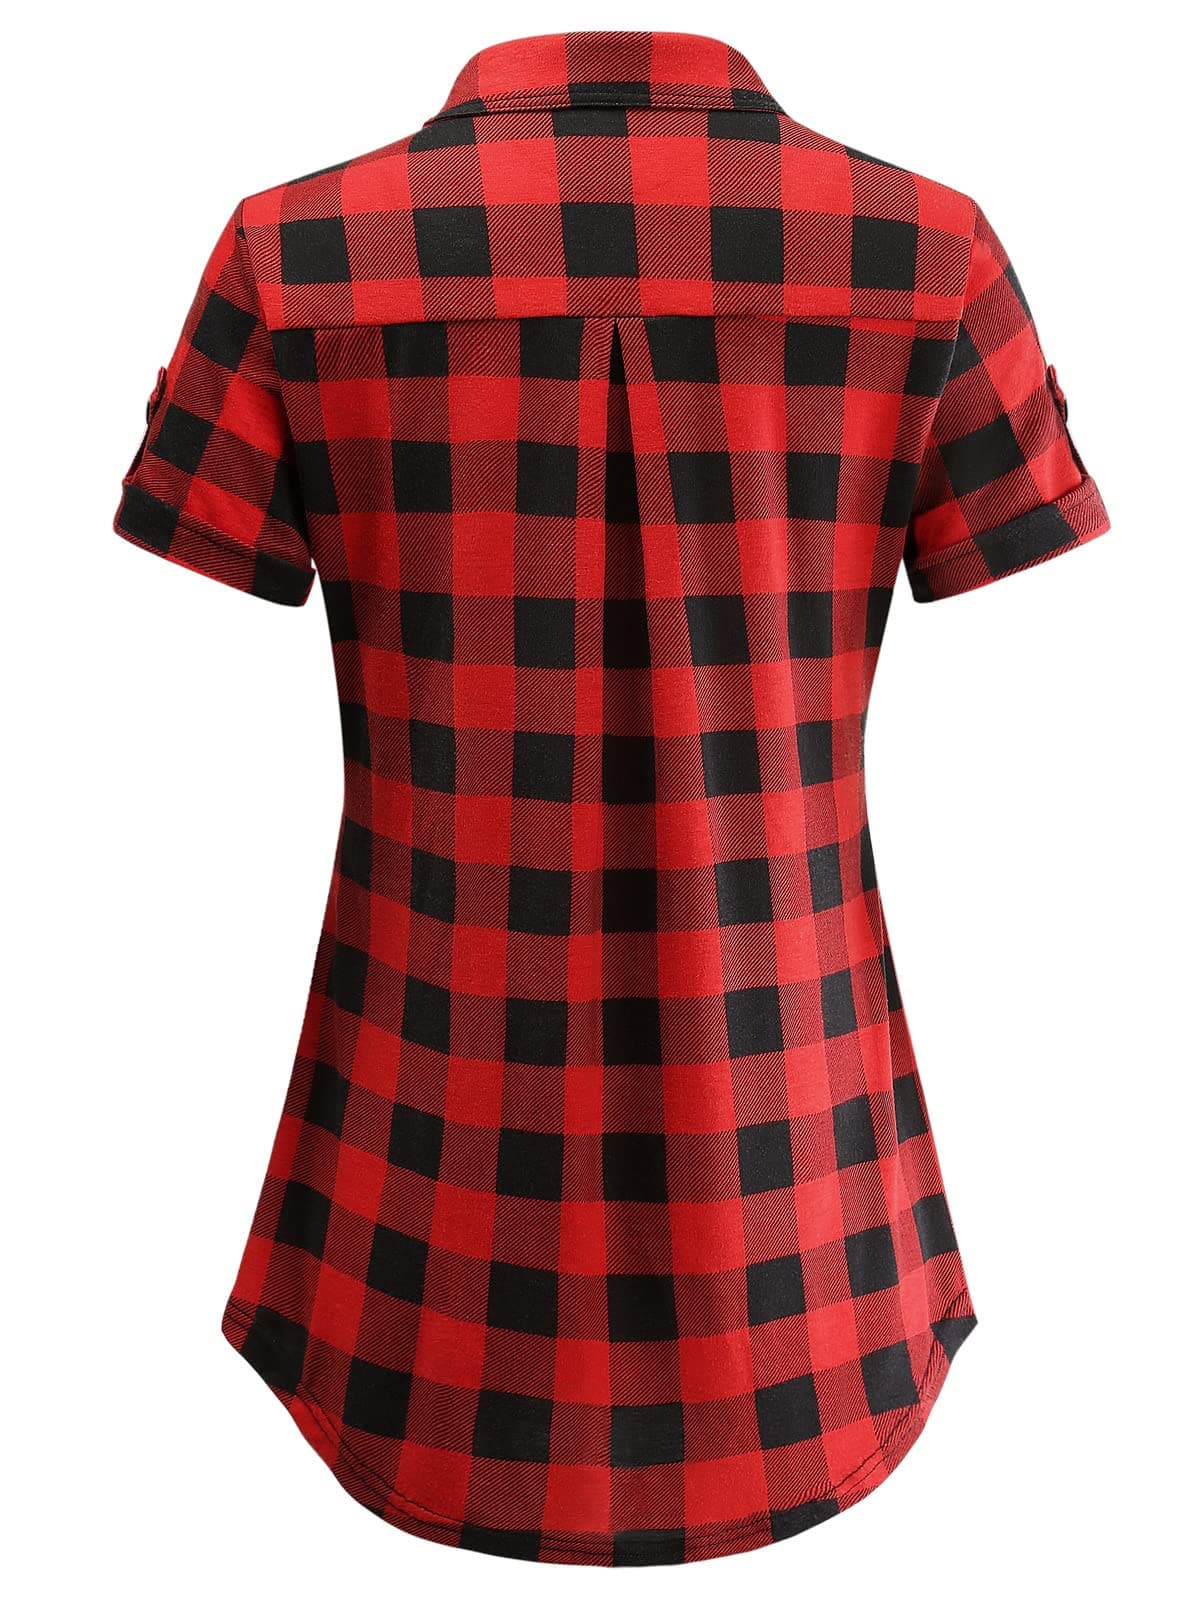 DJT Roll Up Long Sleeve Short Sleeve Red Plaid Women’s Collared Button Down Plaid Shirt